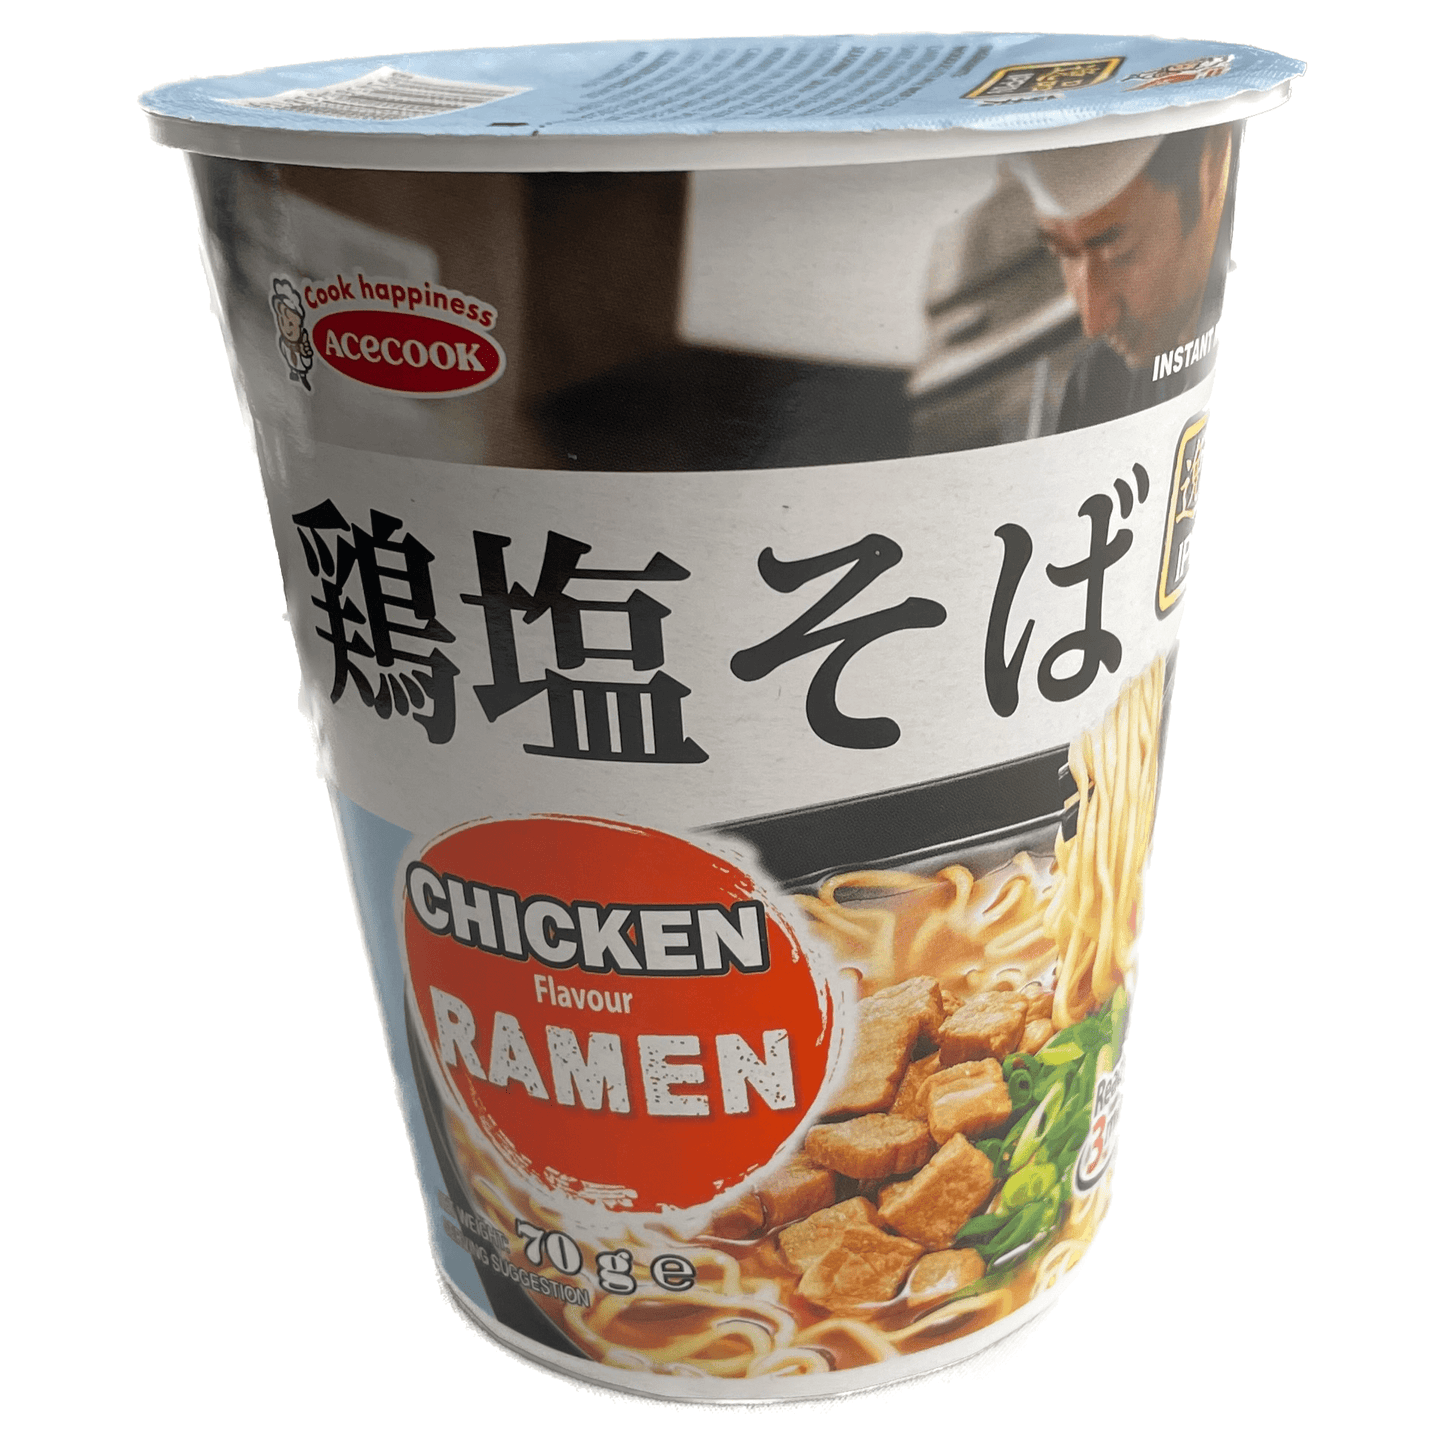 Acecook Ippin Chicken Flavour Instant Ramen Cup 1box (12pcs) / エースコック 逸品 鶏塩そばラーメンカップ 1箱 (12個入) - RiceWineShop